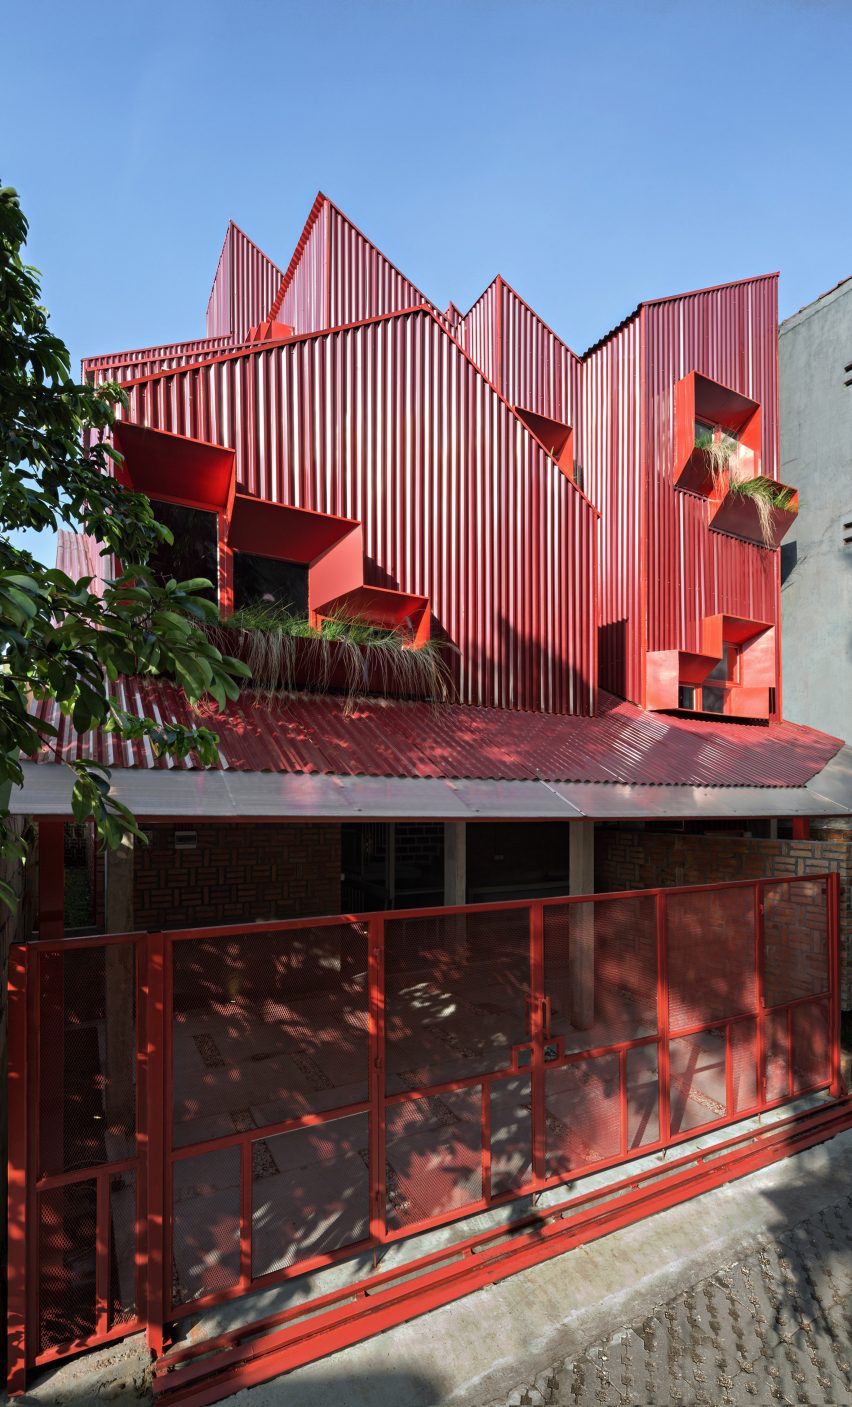 Exterior of red boarding house by Ismail Solehudin Architecture showing stacked volumes